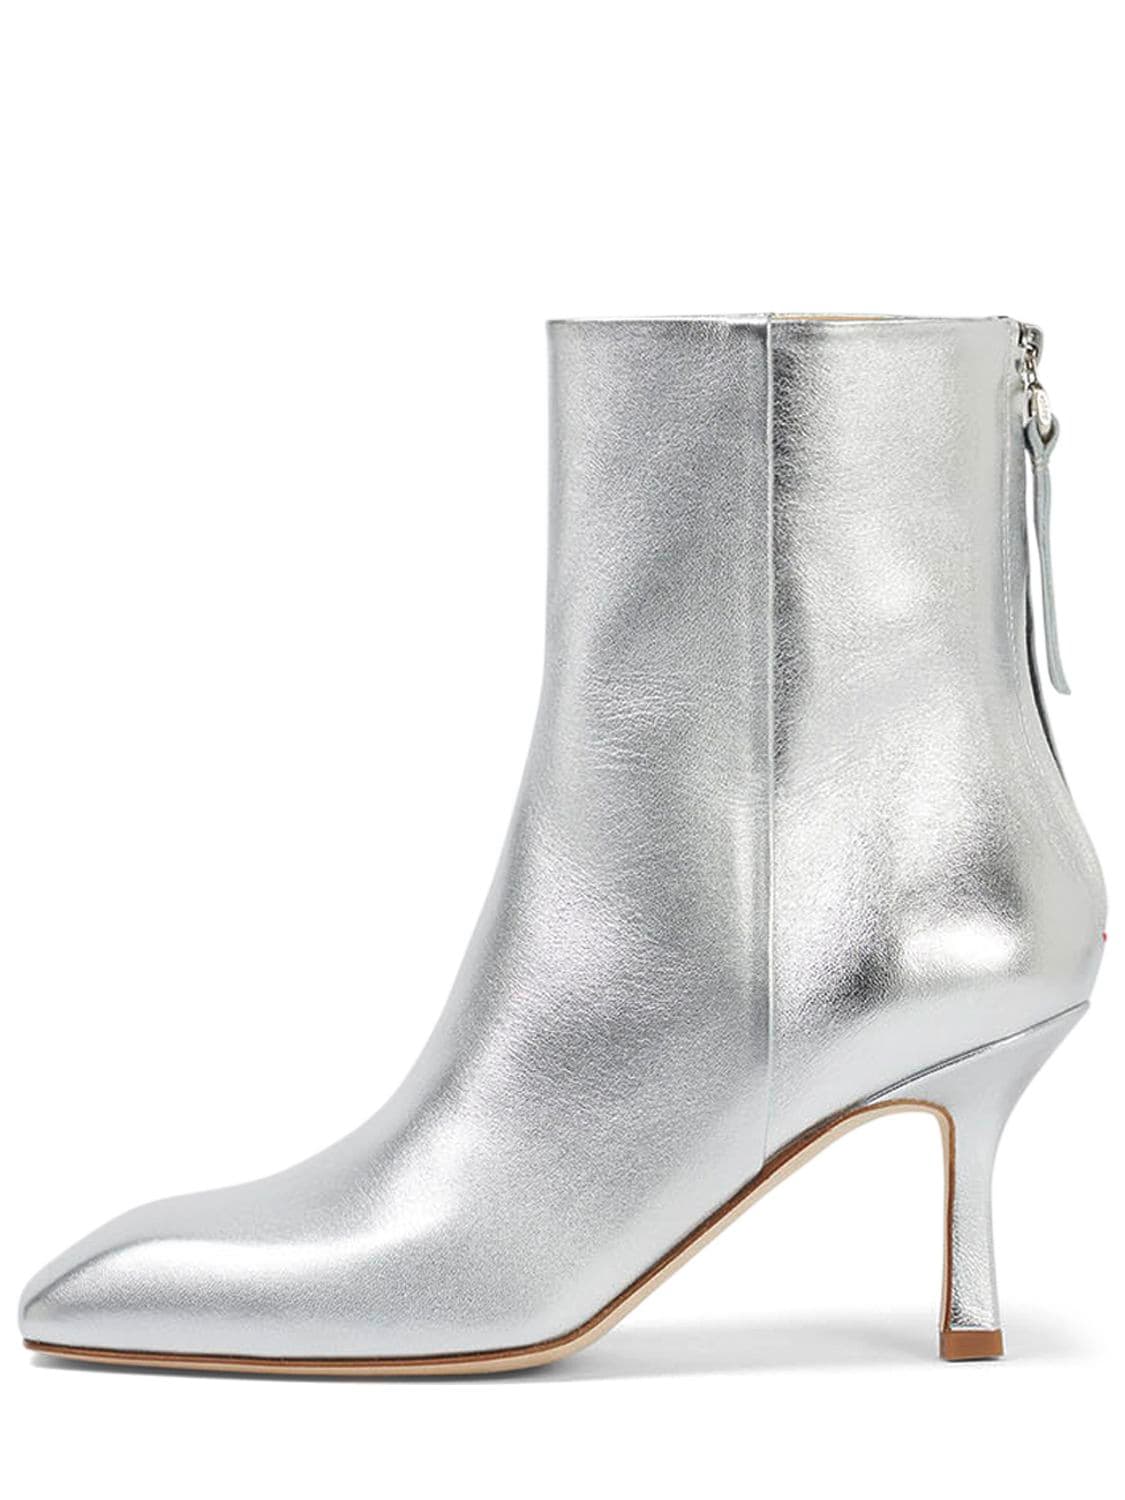 Aeyde 75mm Lola Laminated Leather Ankle Boots In Silver